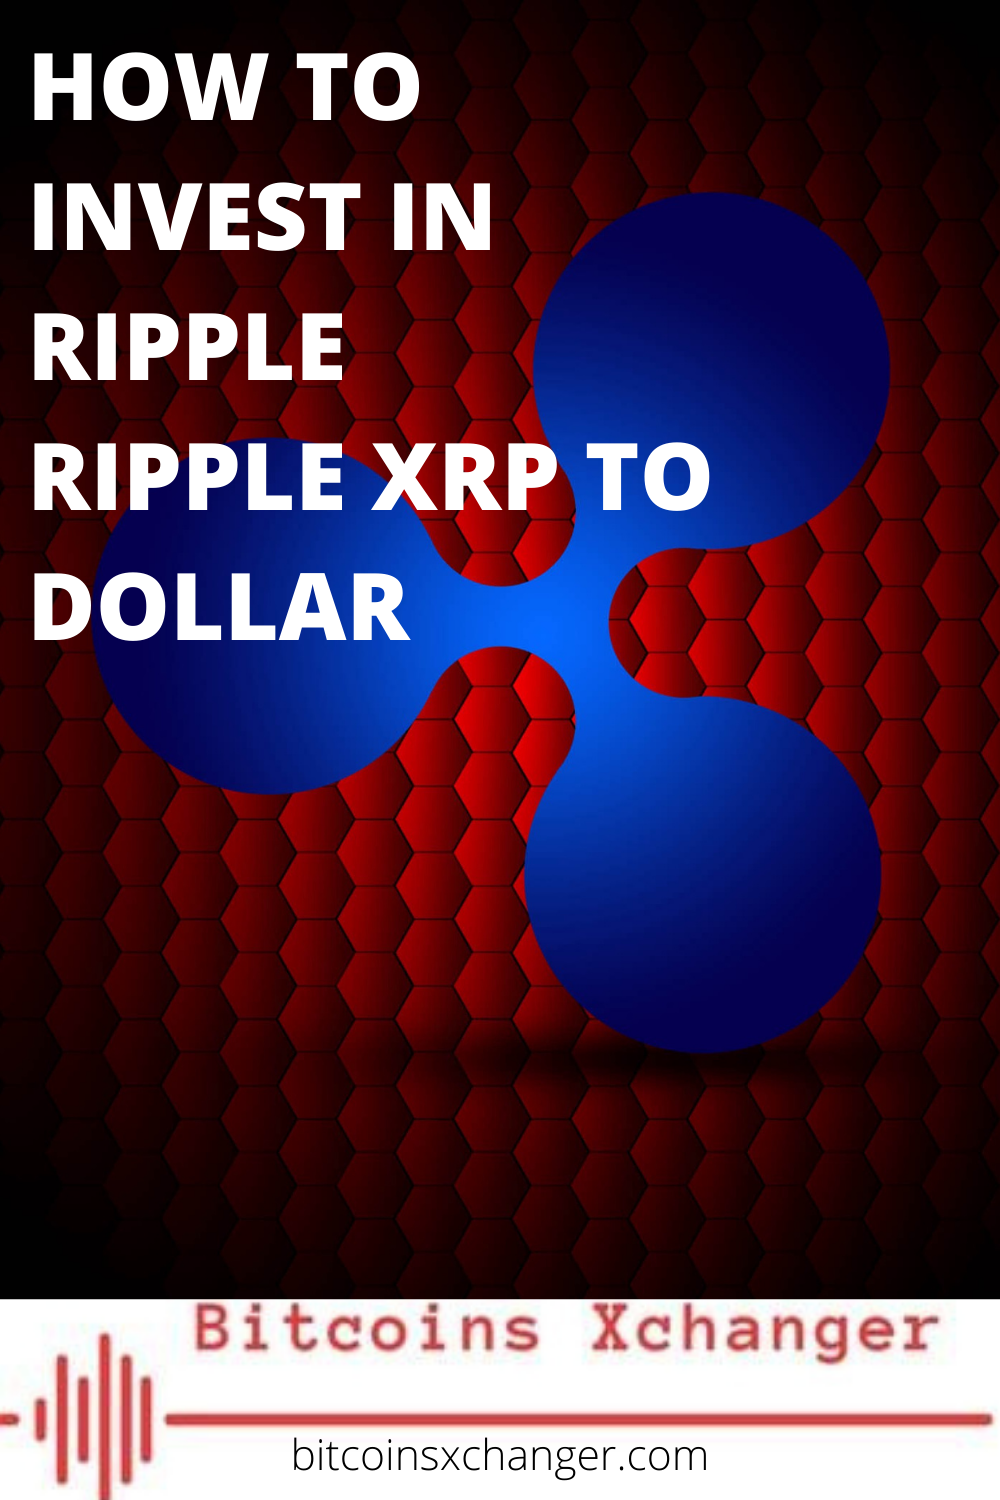 How To Invest In Ripple Cryptocurrency : How To Make Money With Ripple ...